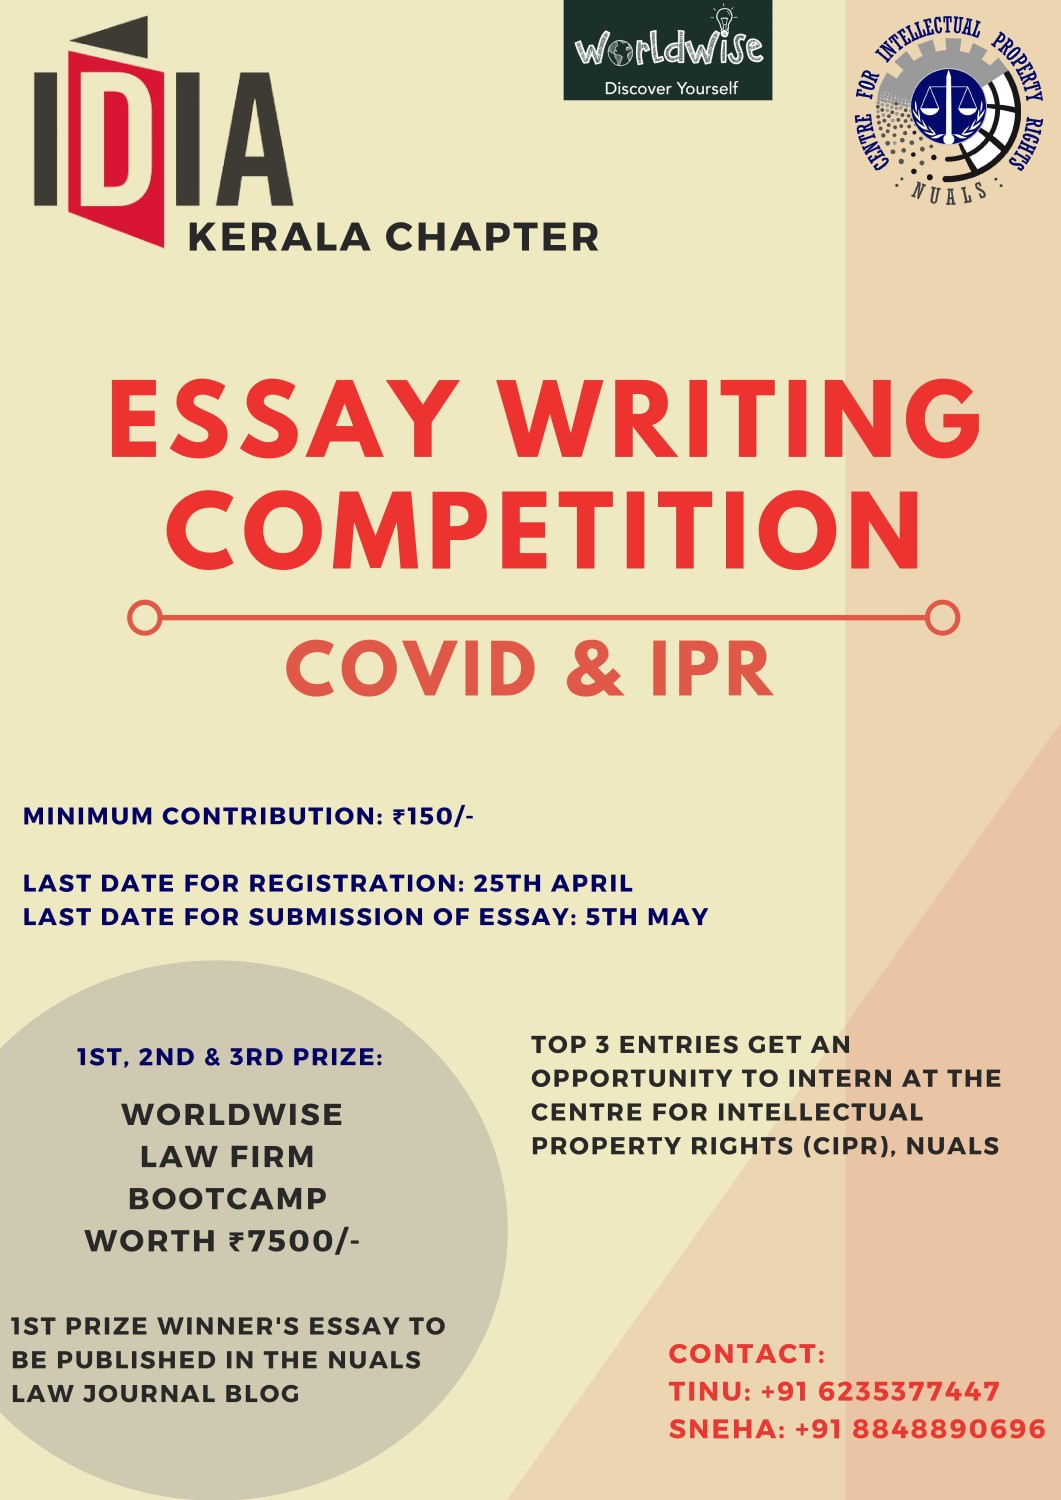 IDIA Kerala Chapter presents Essay Writing Competition on COVID-19 and IPR